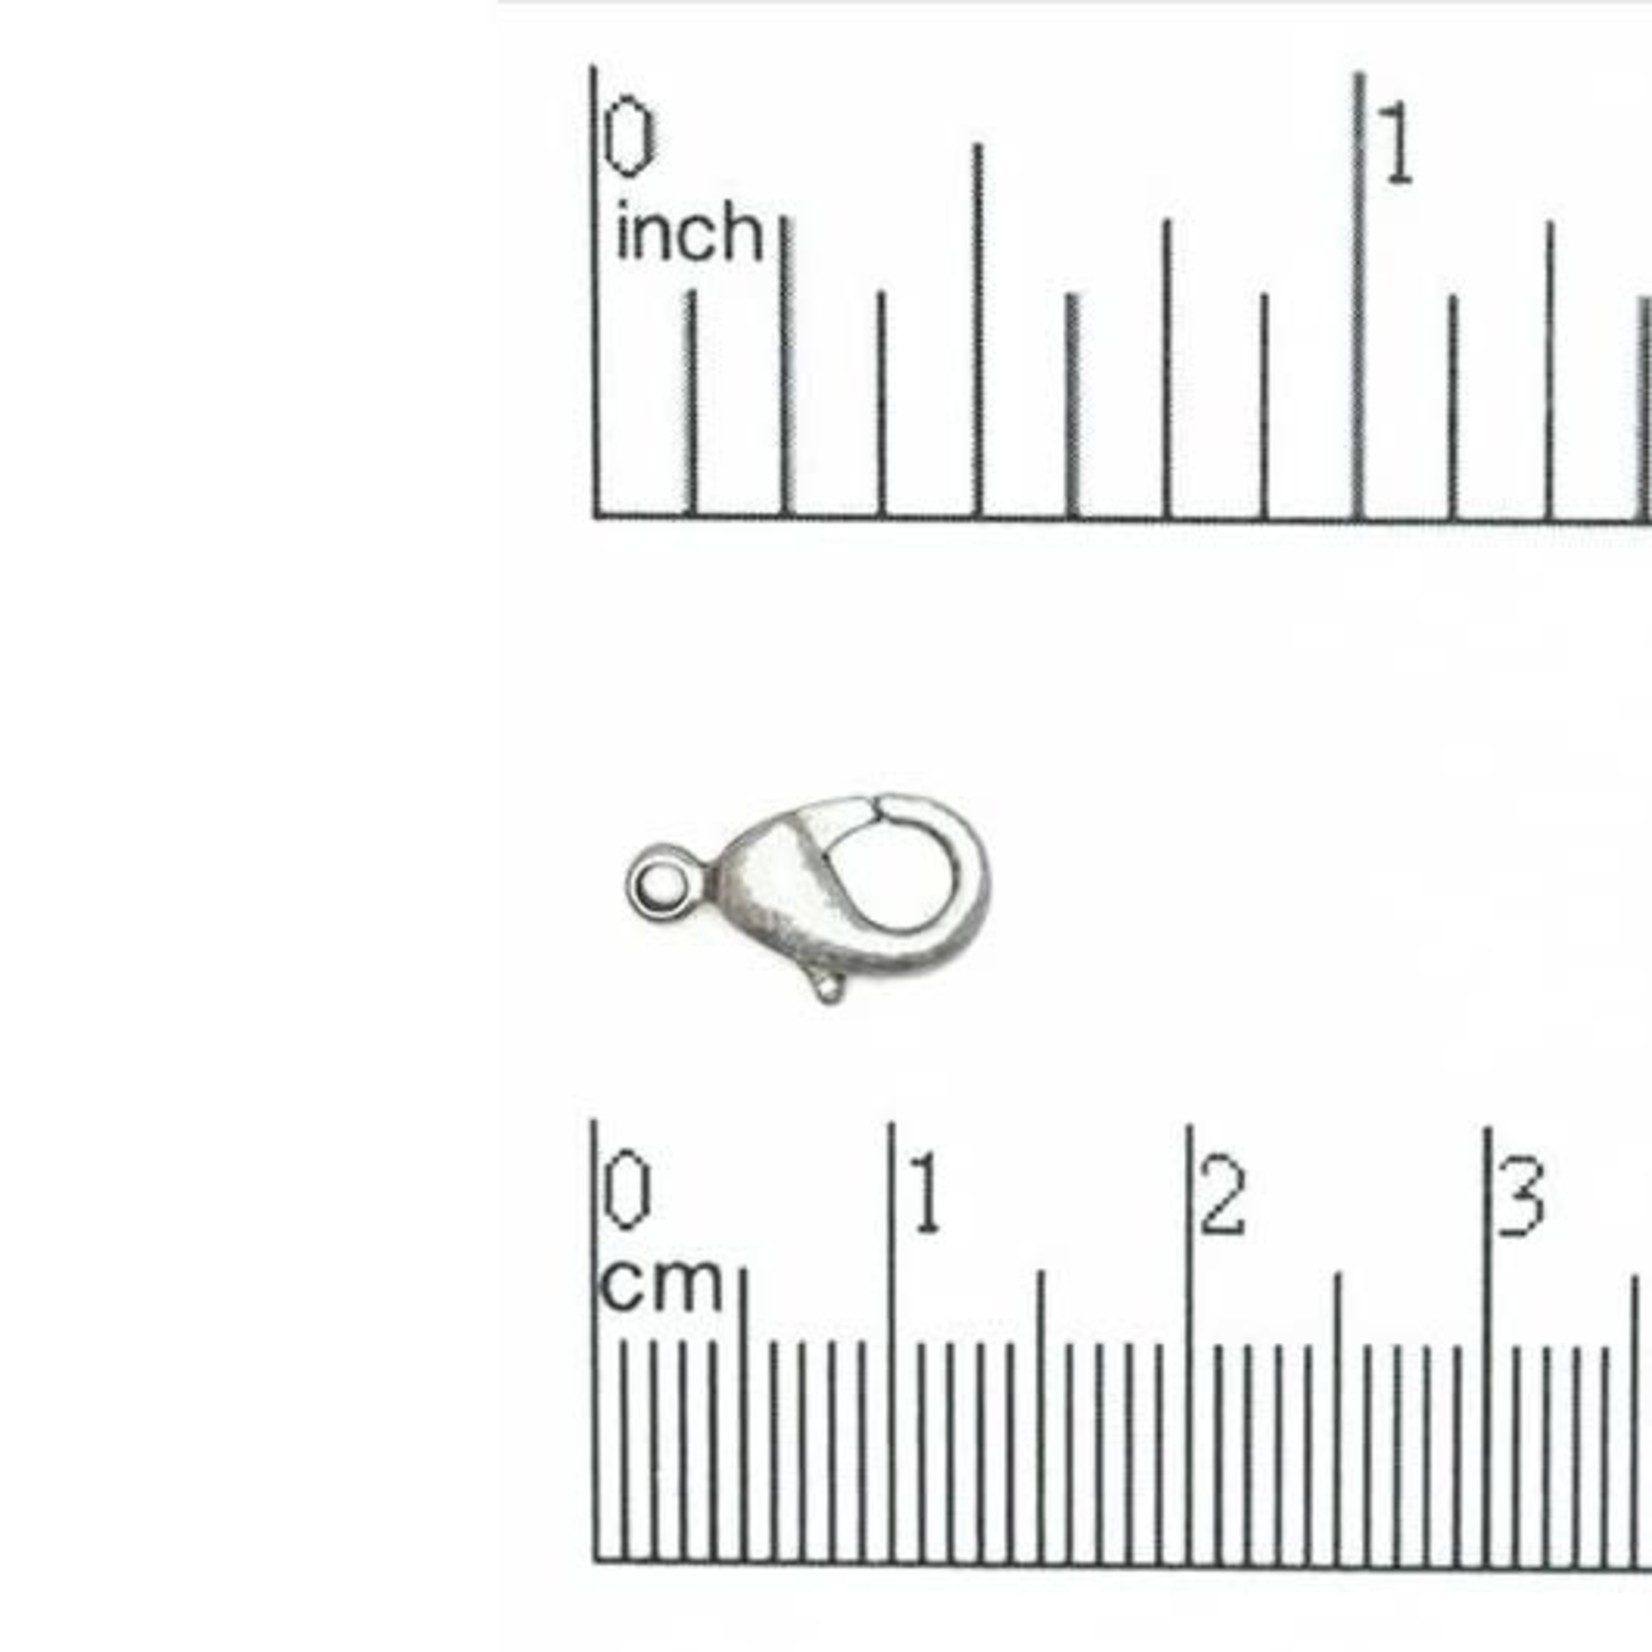 Lobster Clasp 12x7mm Nickel-Free Antique Silver Plated - 20 pieces